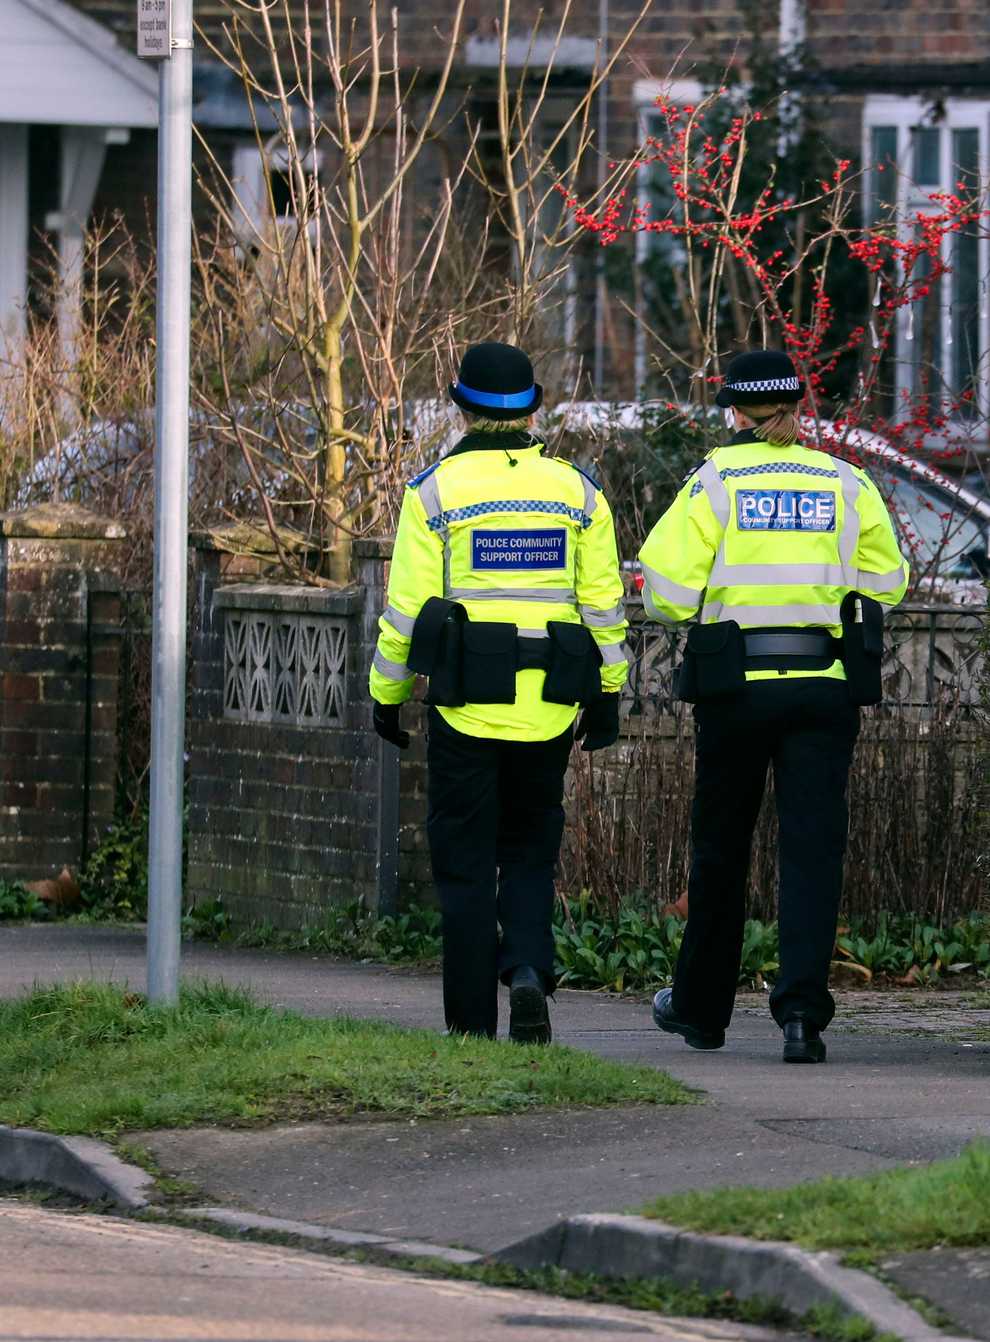 A police pledge to attend all home burglaries has prompted warnings that it could pile pressure on officers and risks becoming another ‘box-ticking exercise’ unless ‘proper resources’ are provided. (Steve Parsons/PA)